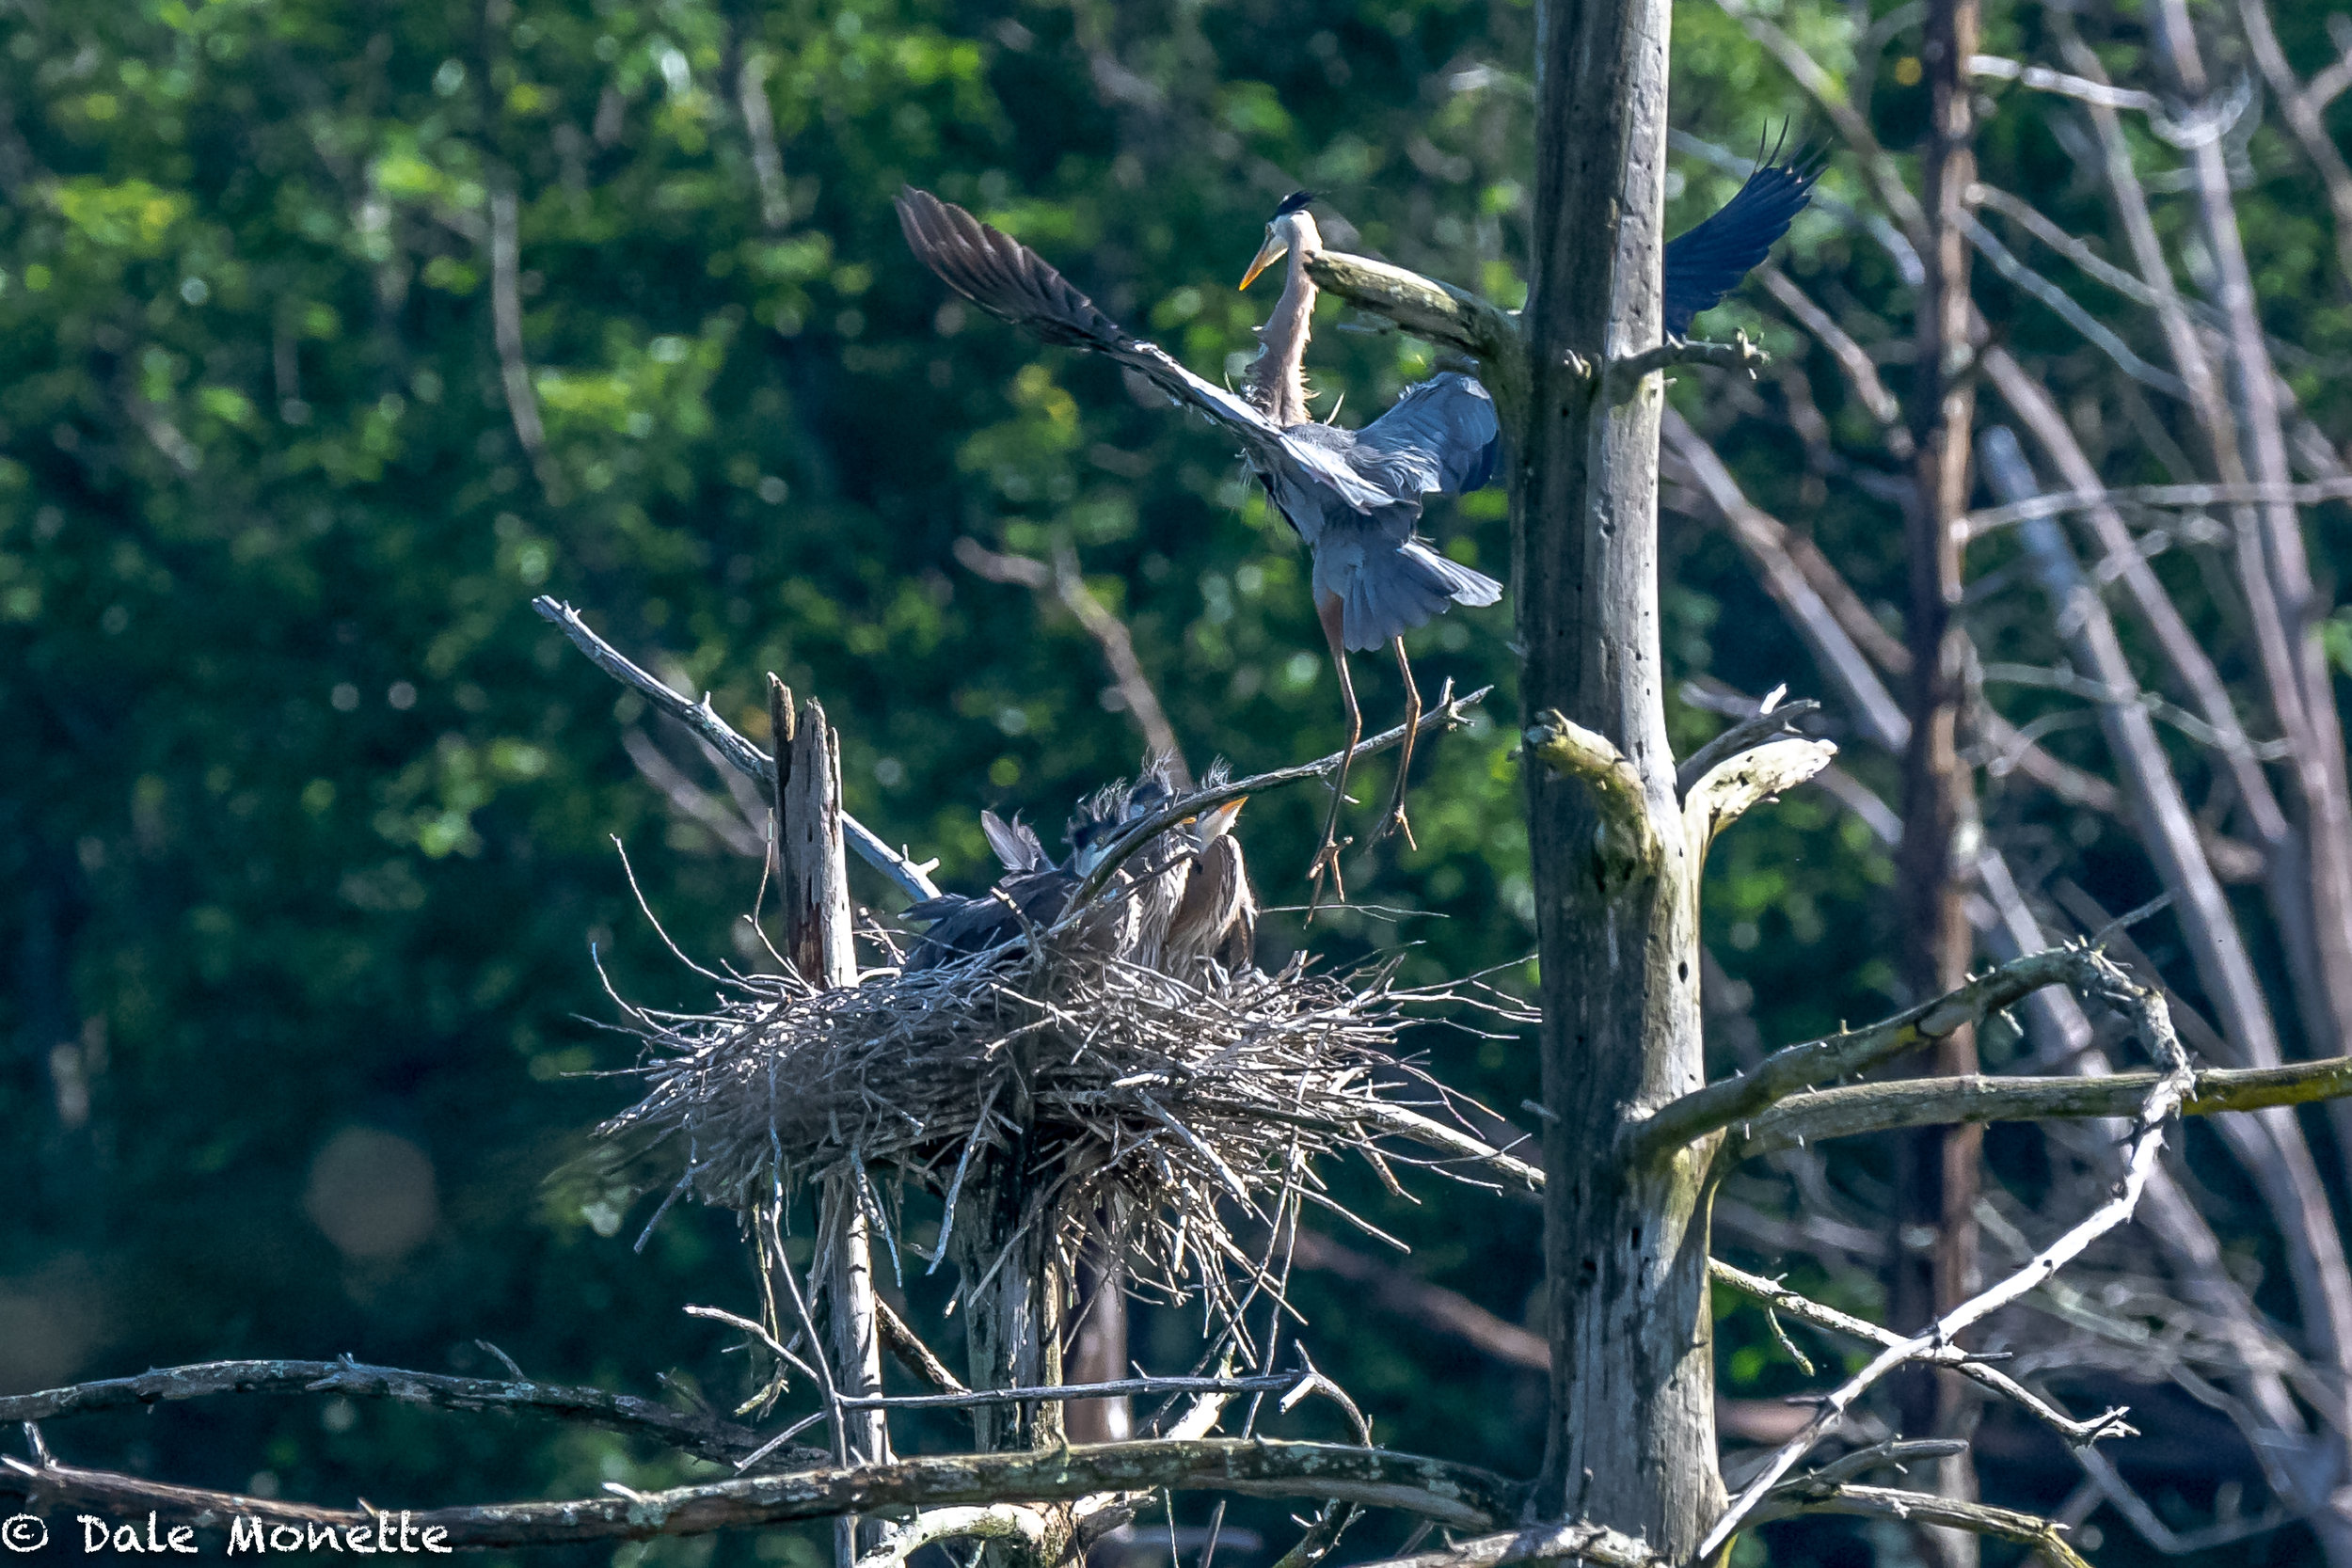   An adult great blue heron drops in with breakfast for the three chicks that are all hunkered down in the nest, (6/18/18)  